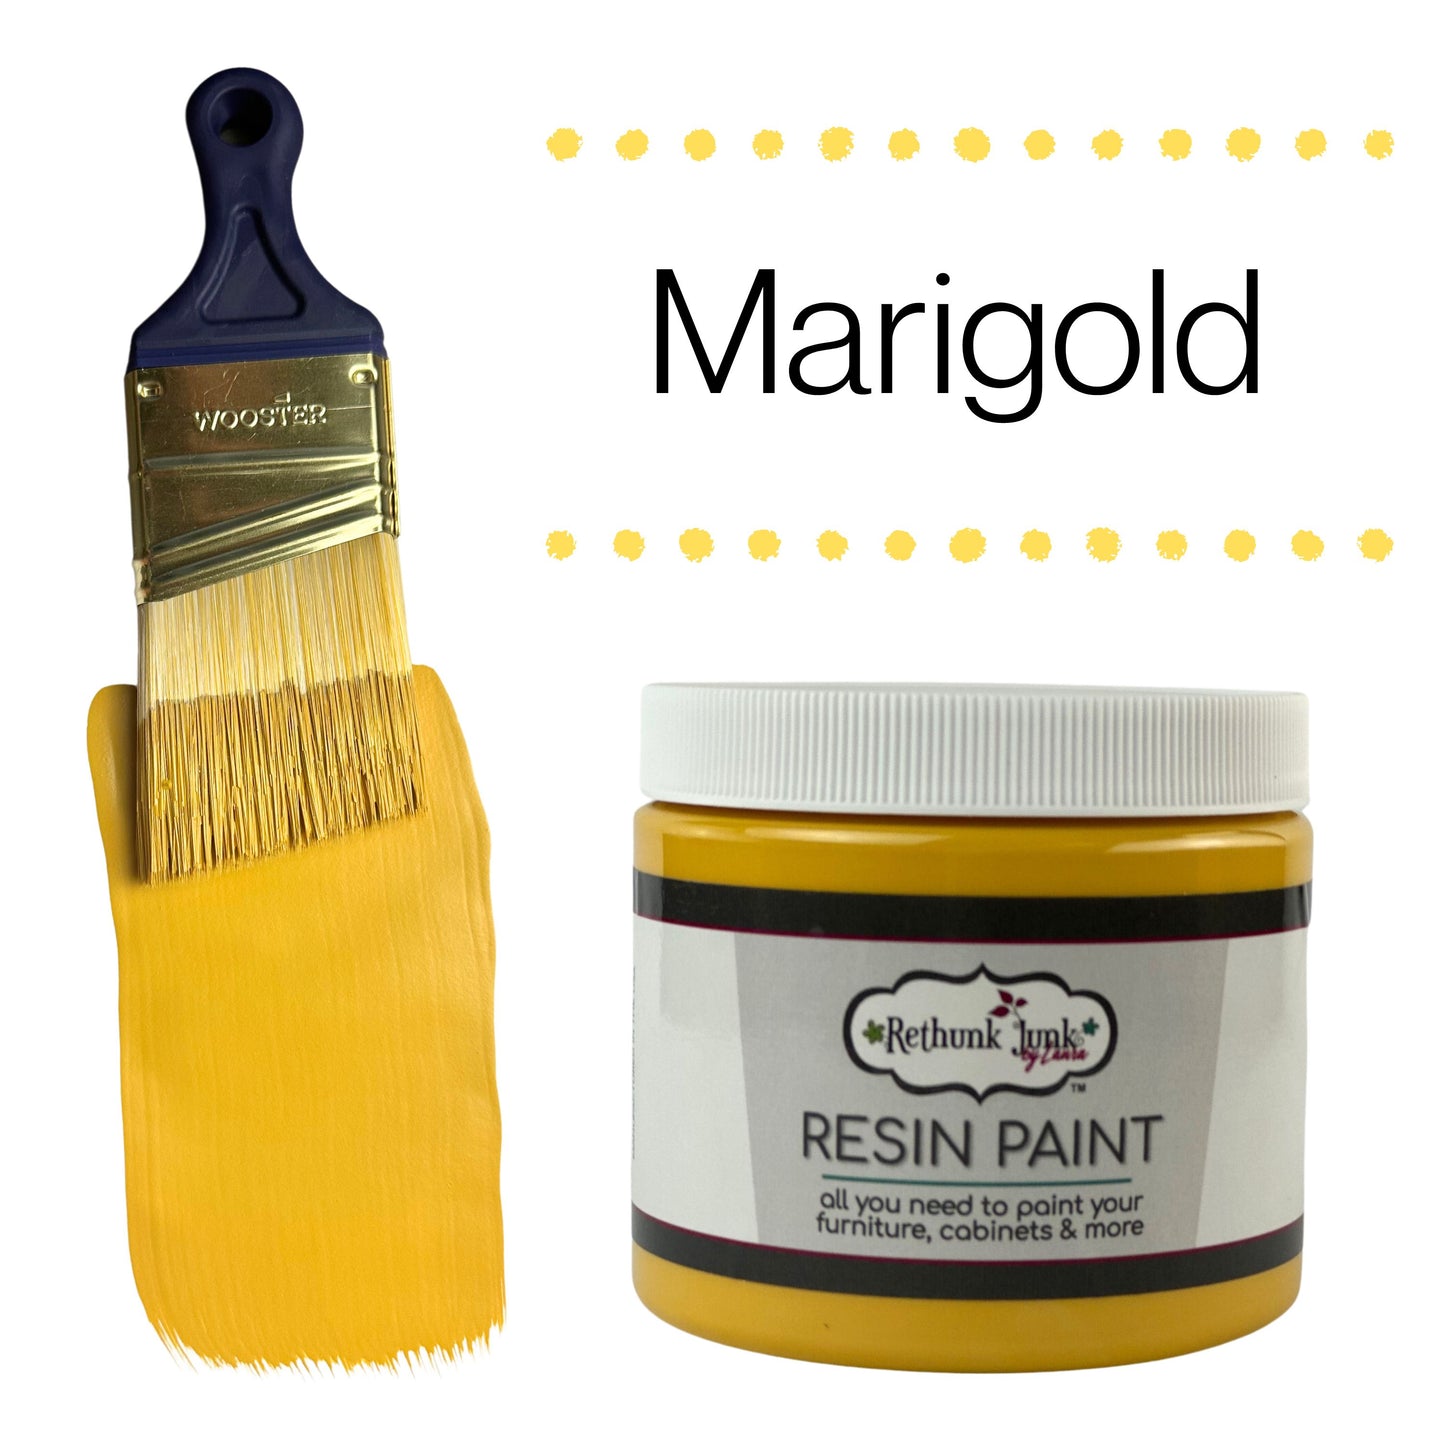 Rethunk Junk Resin Paint in Marigold